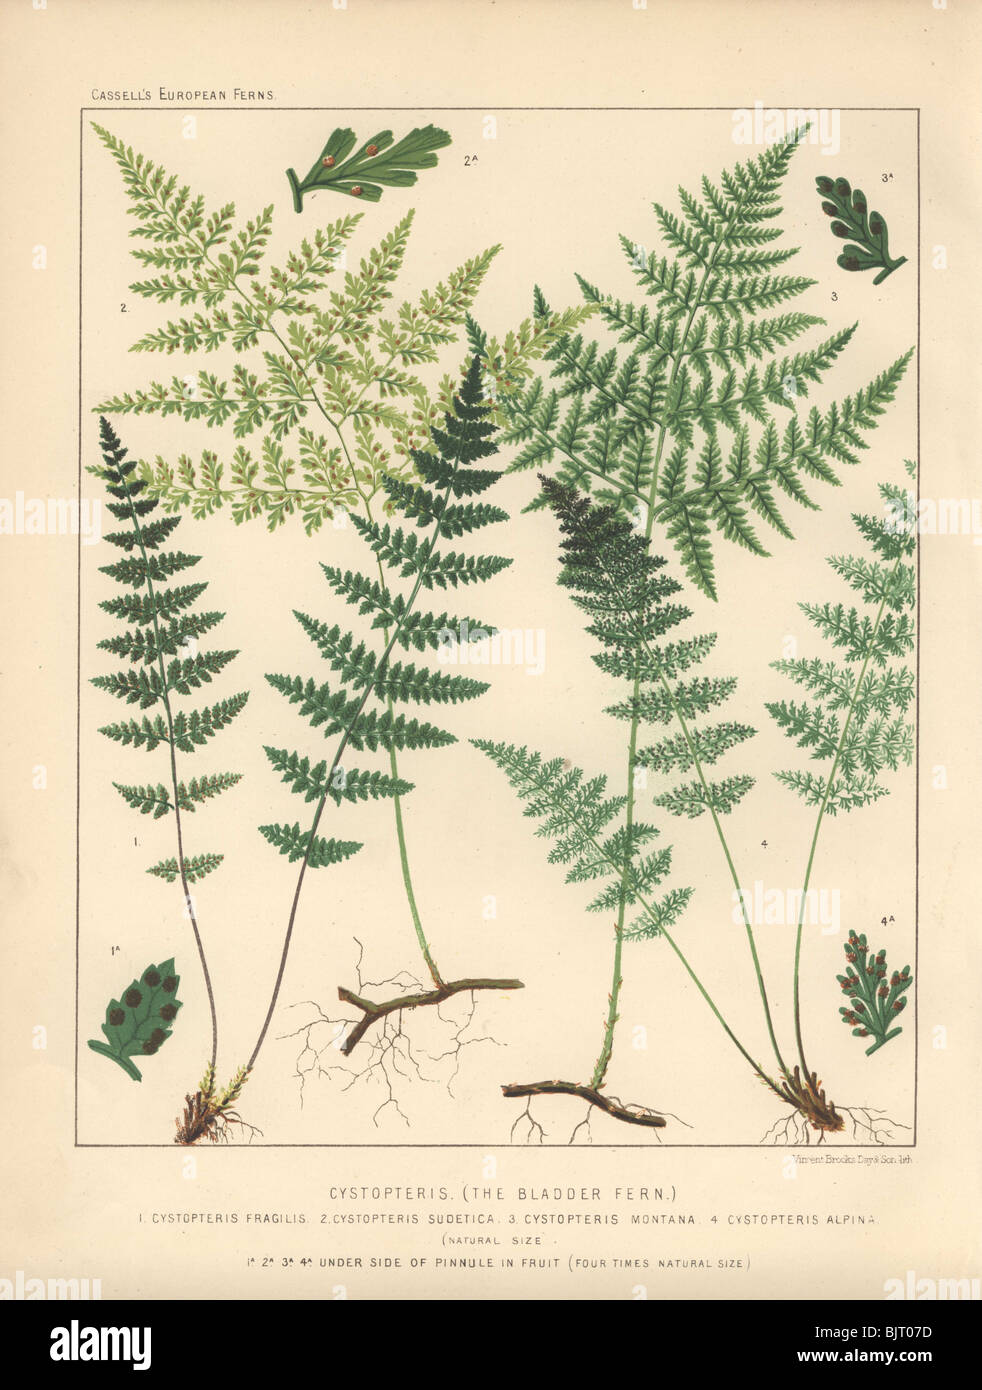 Four varieties of bladder fern (Cystopteris fragilis, sudetica, montana and alpina). Stock Photo